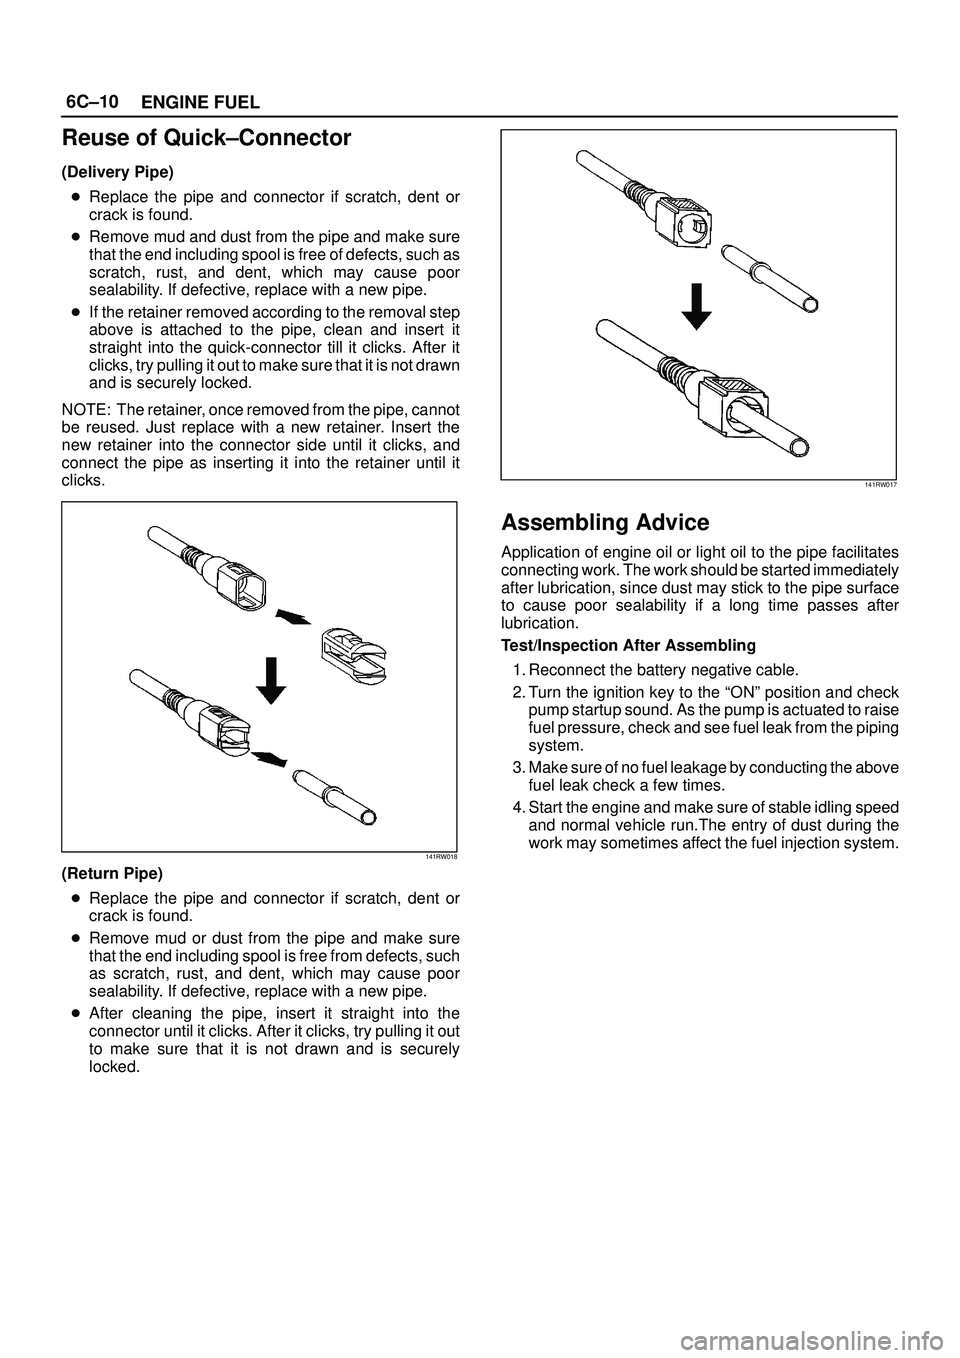 ISUZU TROOPER 1998  Service Repair Manual 6C±10
ENGINE FUEL
Reuse of Quick±Connector
(Delivery Pipe)
Replace the pipe and connector if scratch, dent or
crack is found.
Remove mud and dust from the pipe and make sure
that the end including